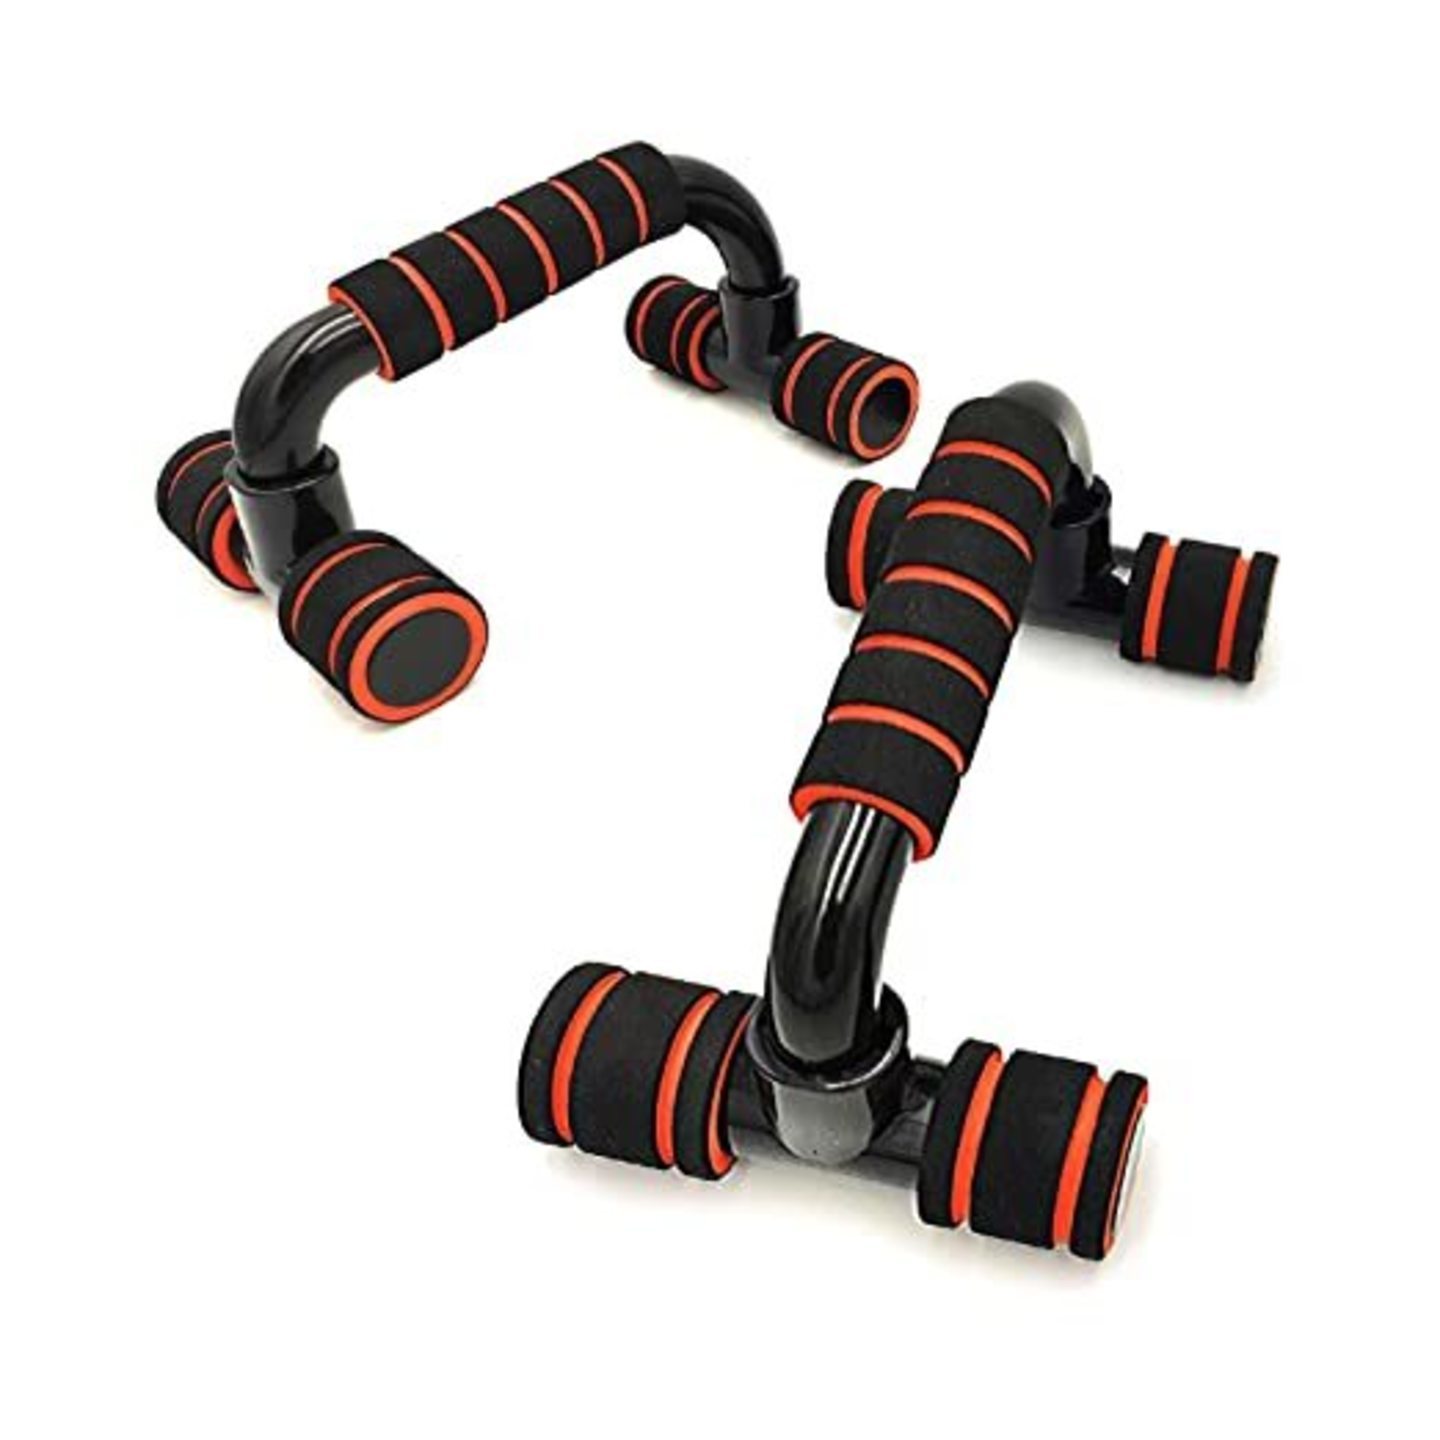 Push Up Bar Deluxe